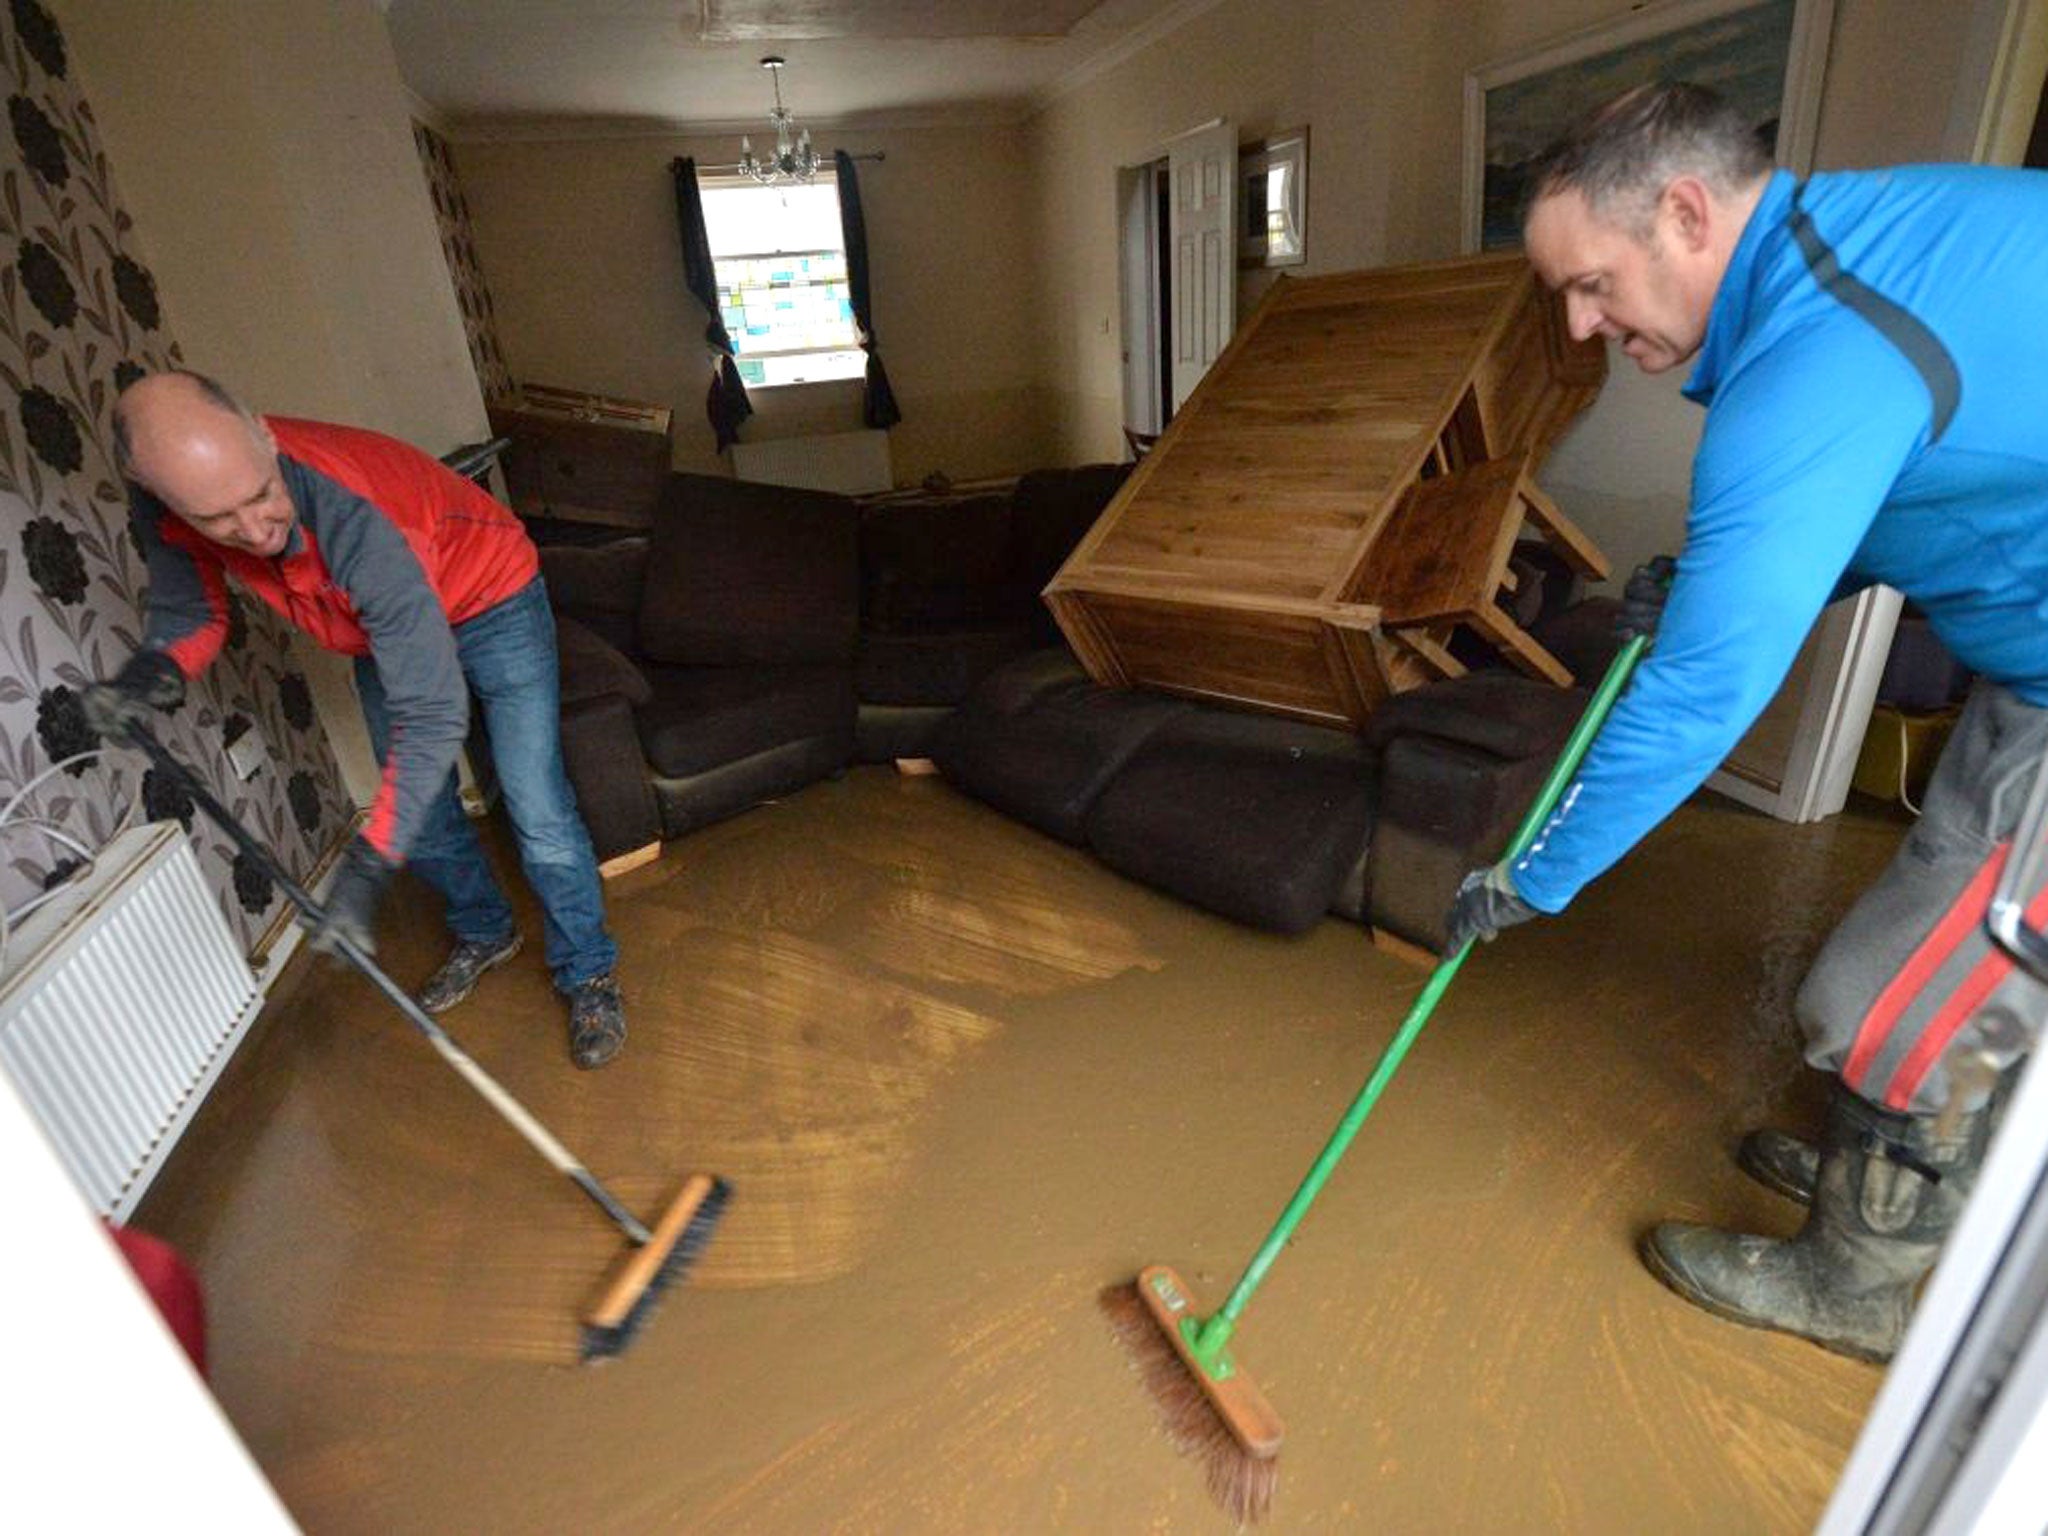 A reader knew the premium would go up after claiming for water damage. But the rise was huge